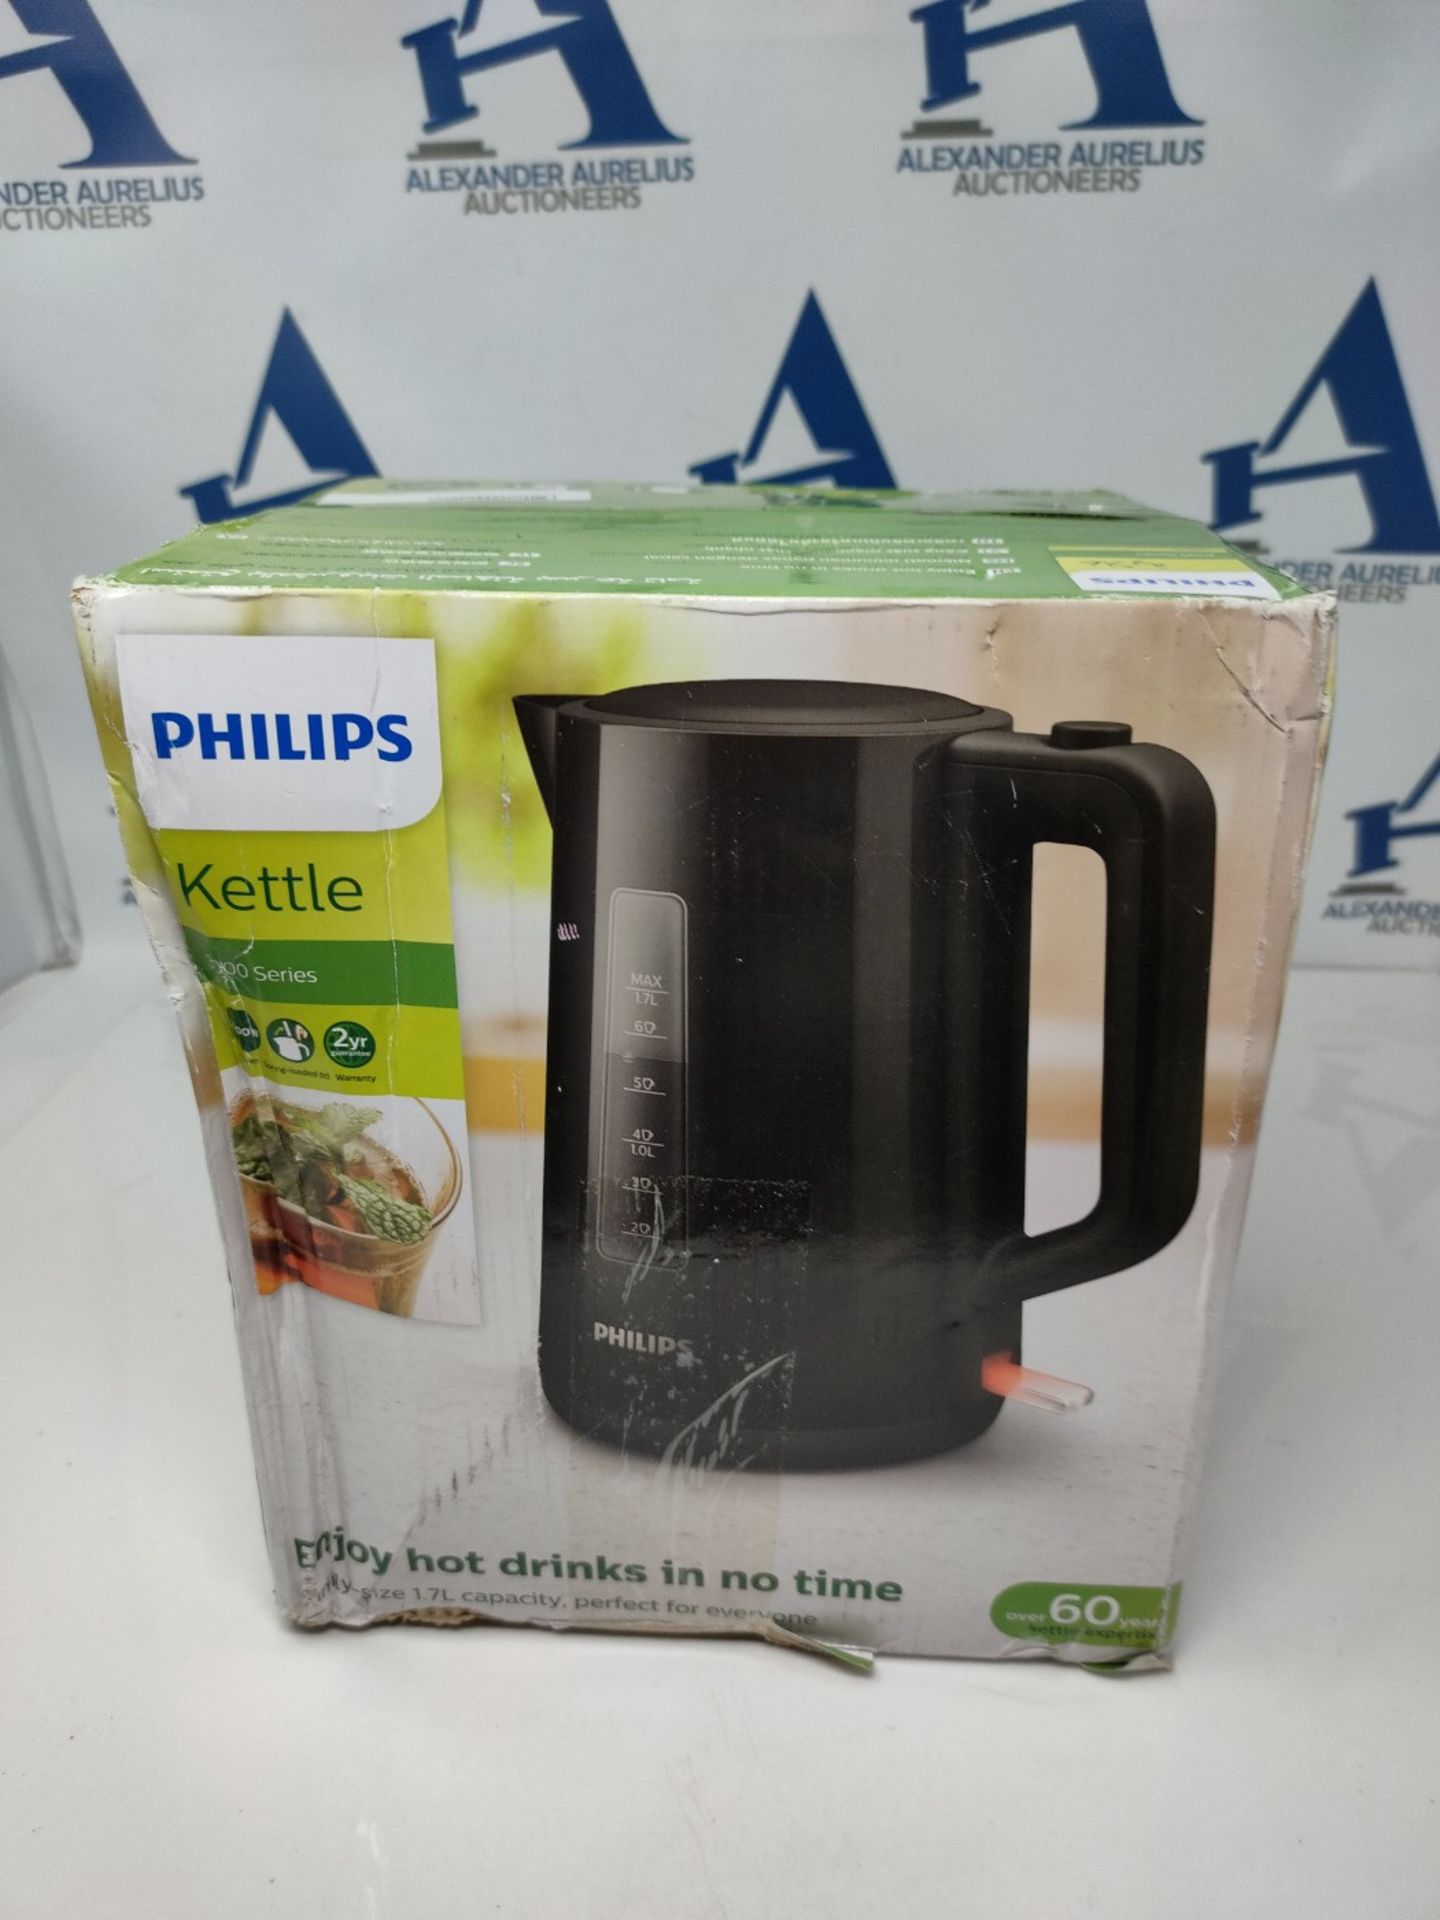 Philips Domestic Appliances Electric Kettle, 3000 Series, 1850 W, 1.7 litre Family Siz - Image 2 of 3